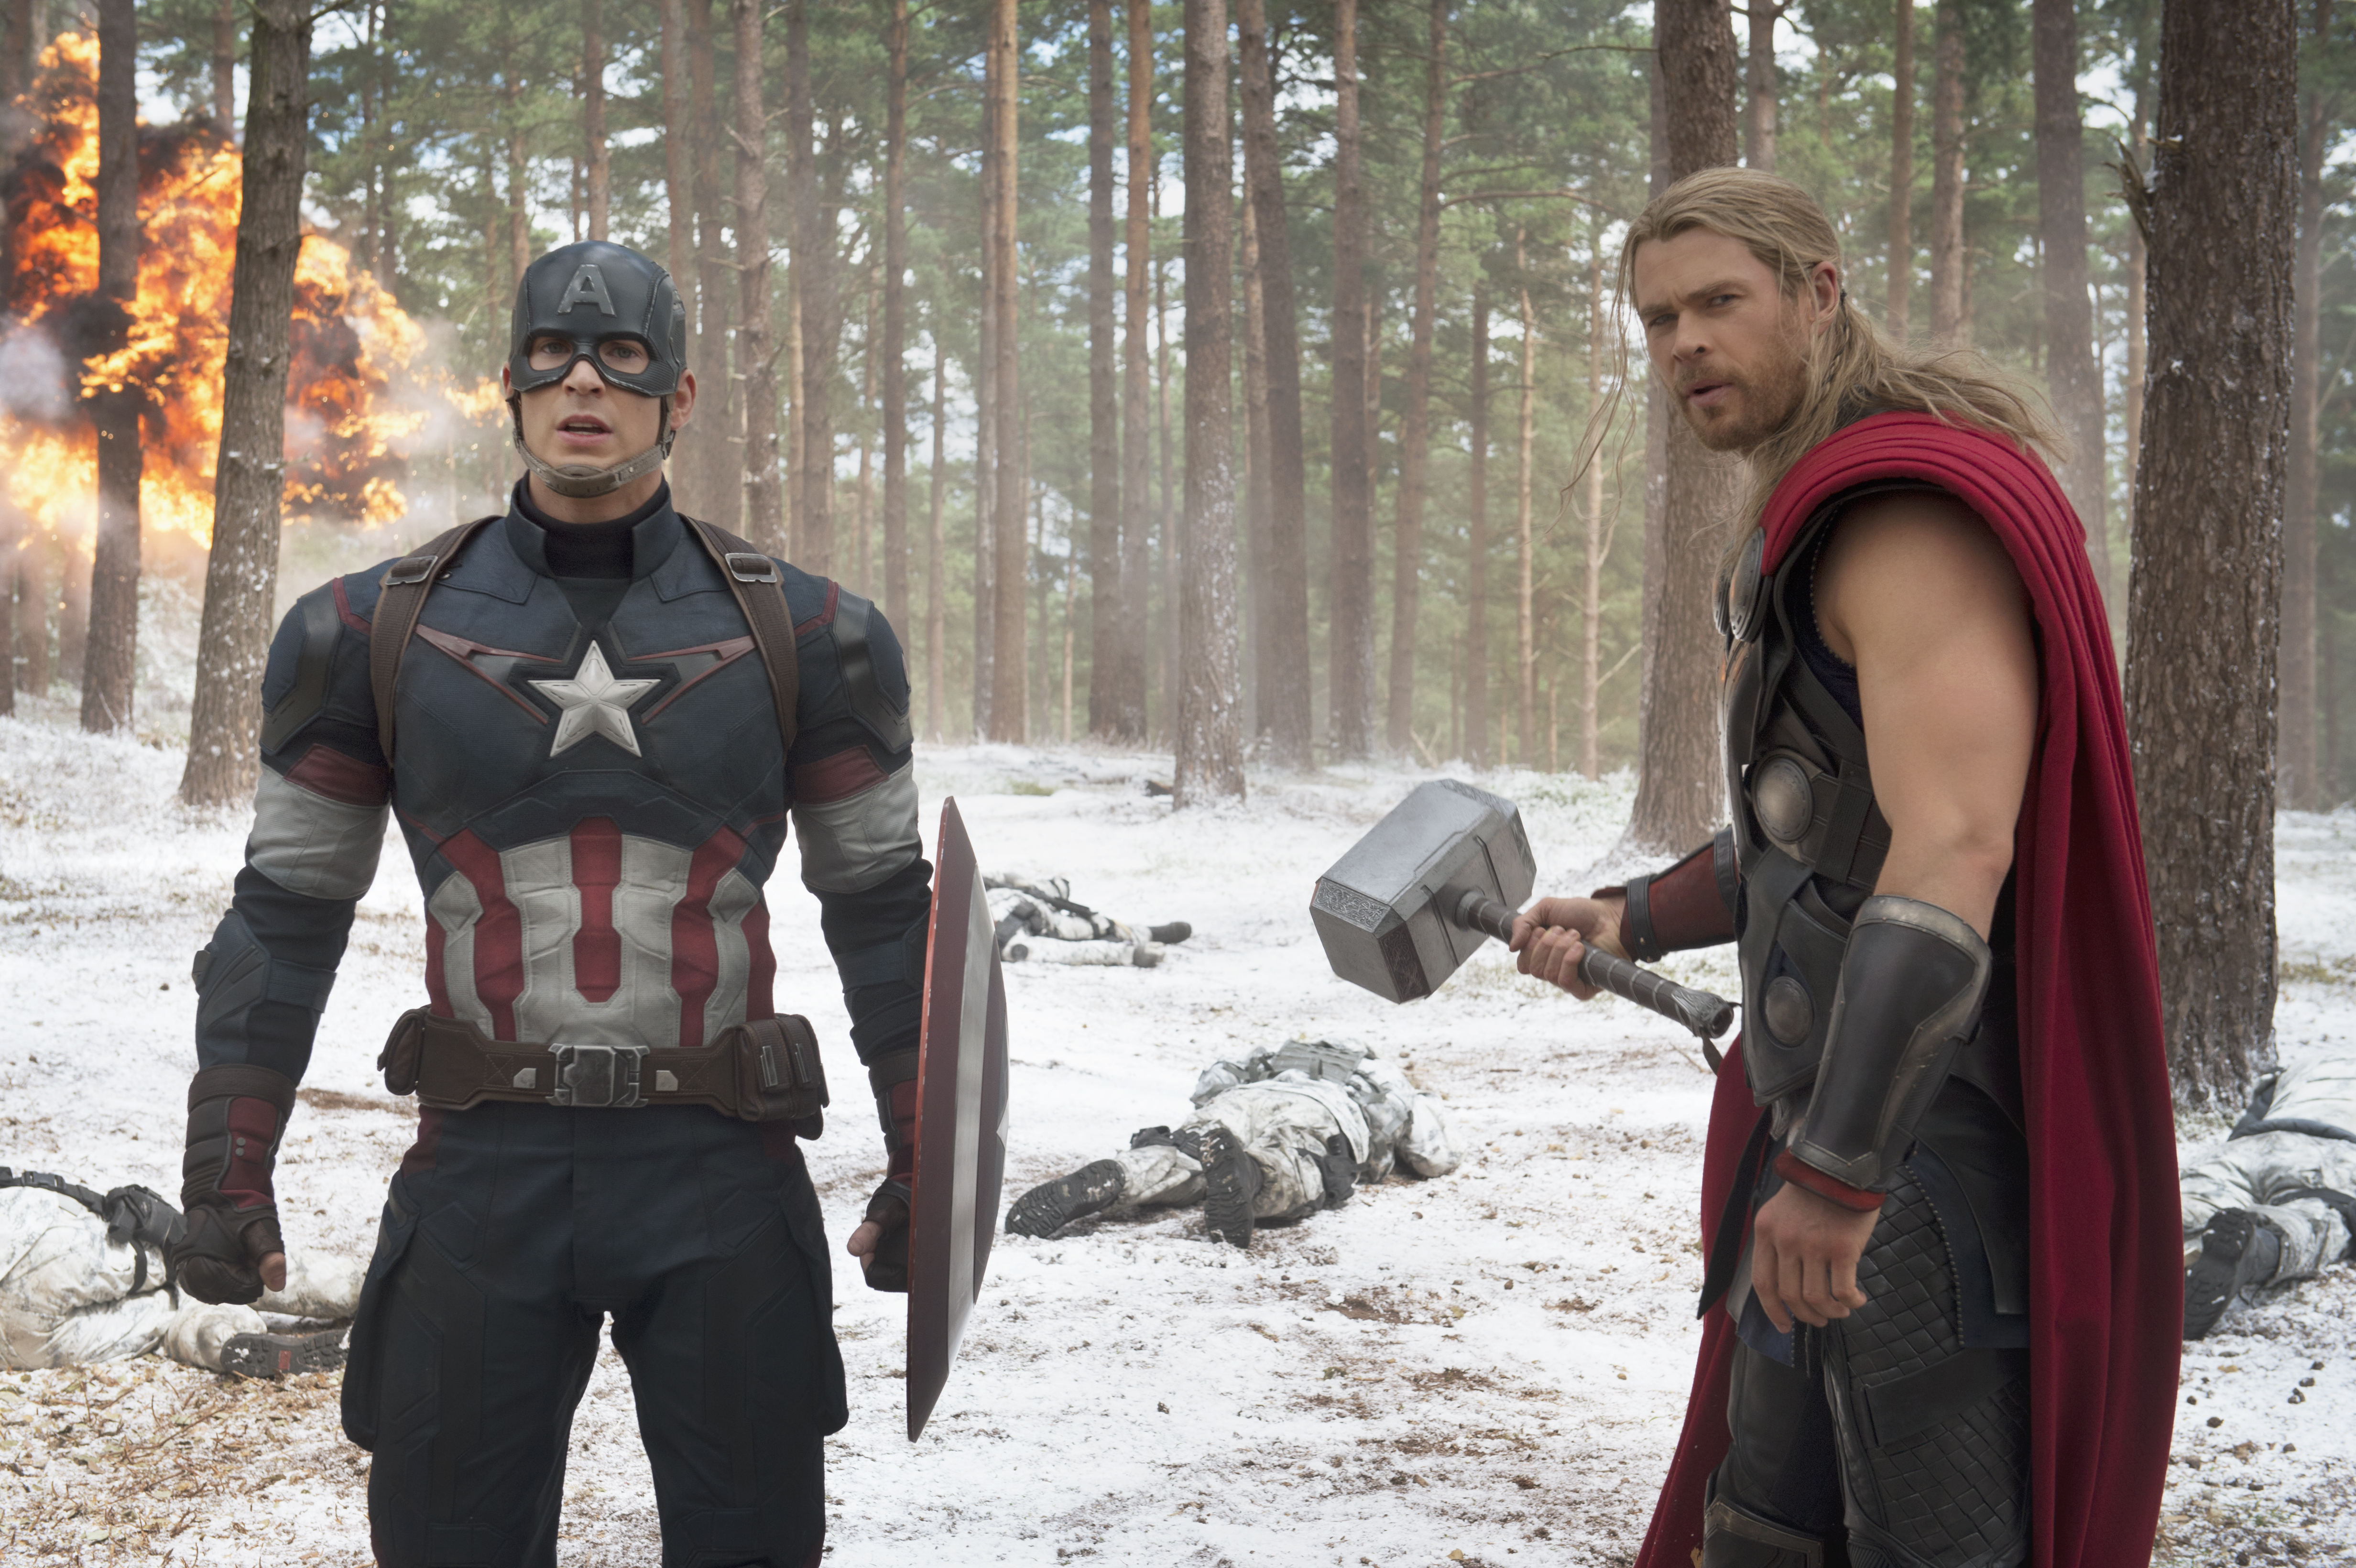 Chris Evans and Chris Hemsworth star in Marvel's "The Avengers: Age of Ultron"